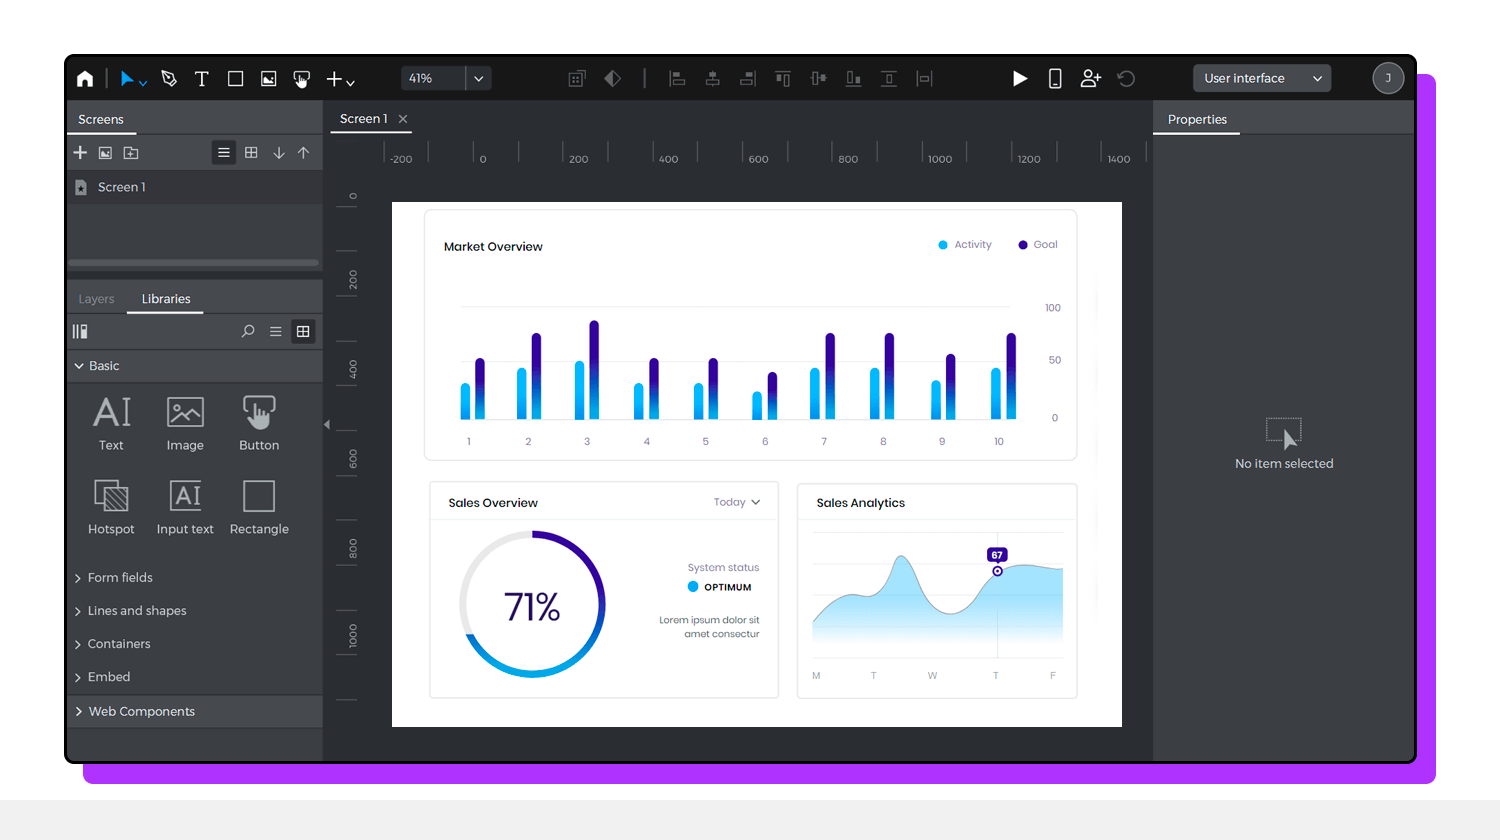 Prototyping tool interface showing market overview, sales overview, and sales analytics data visualizations